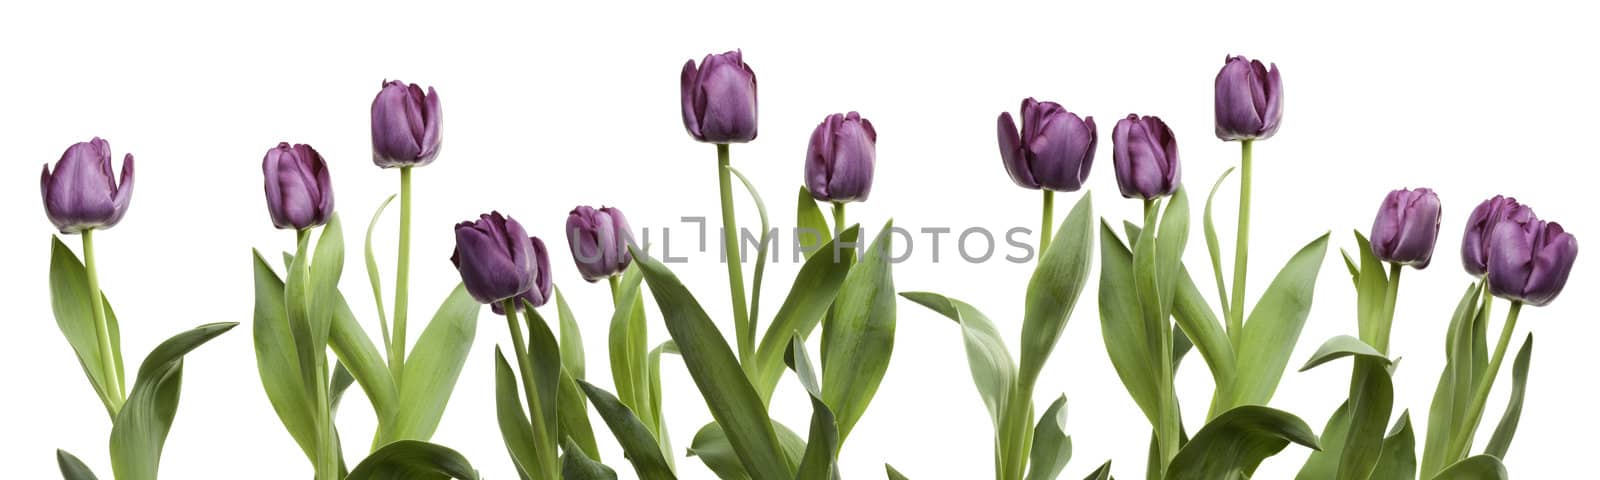 Row of Purple Tulips on a White Background.